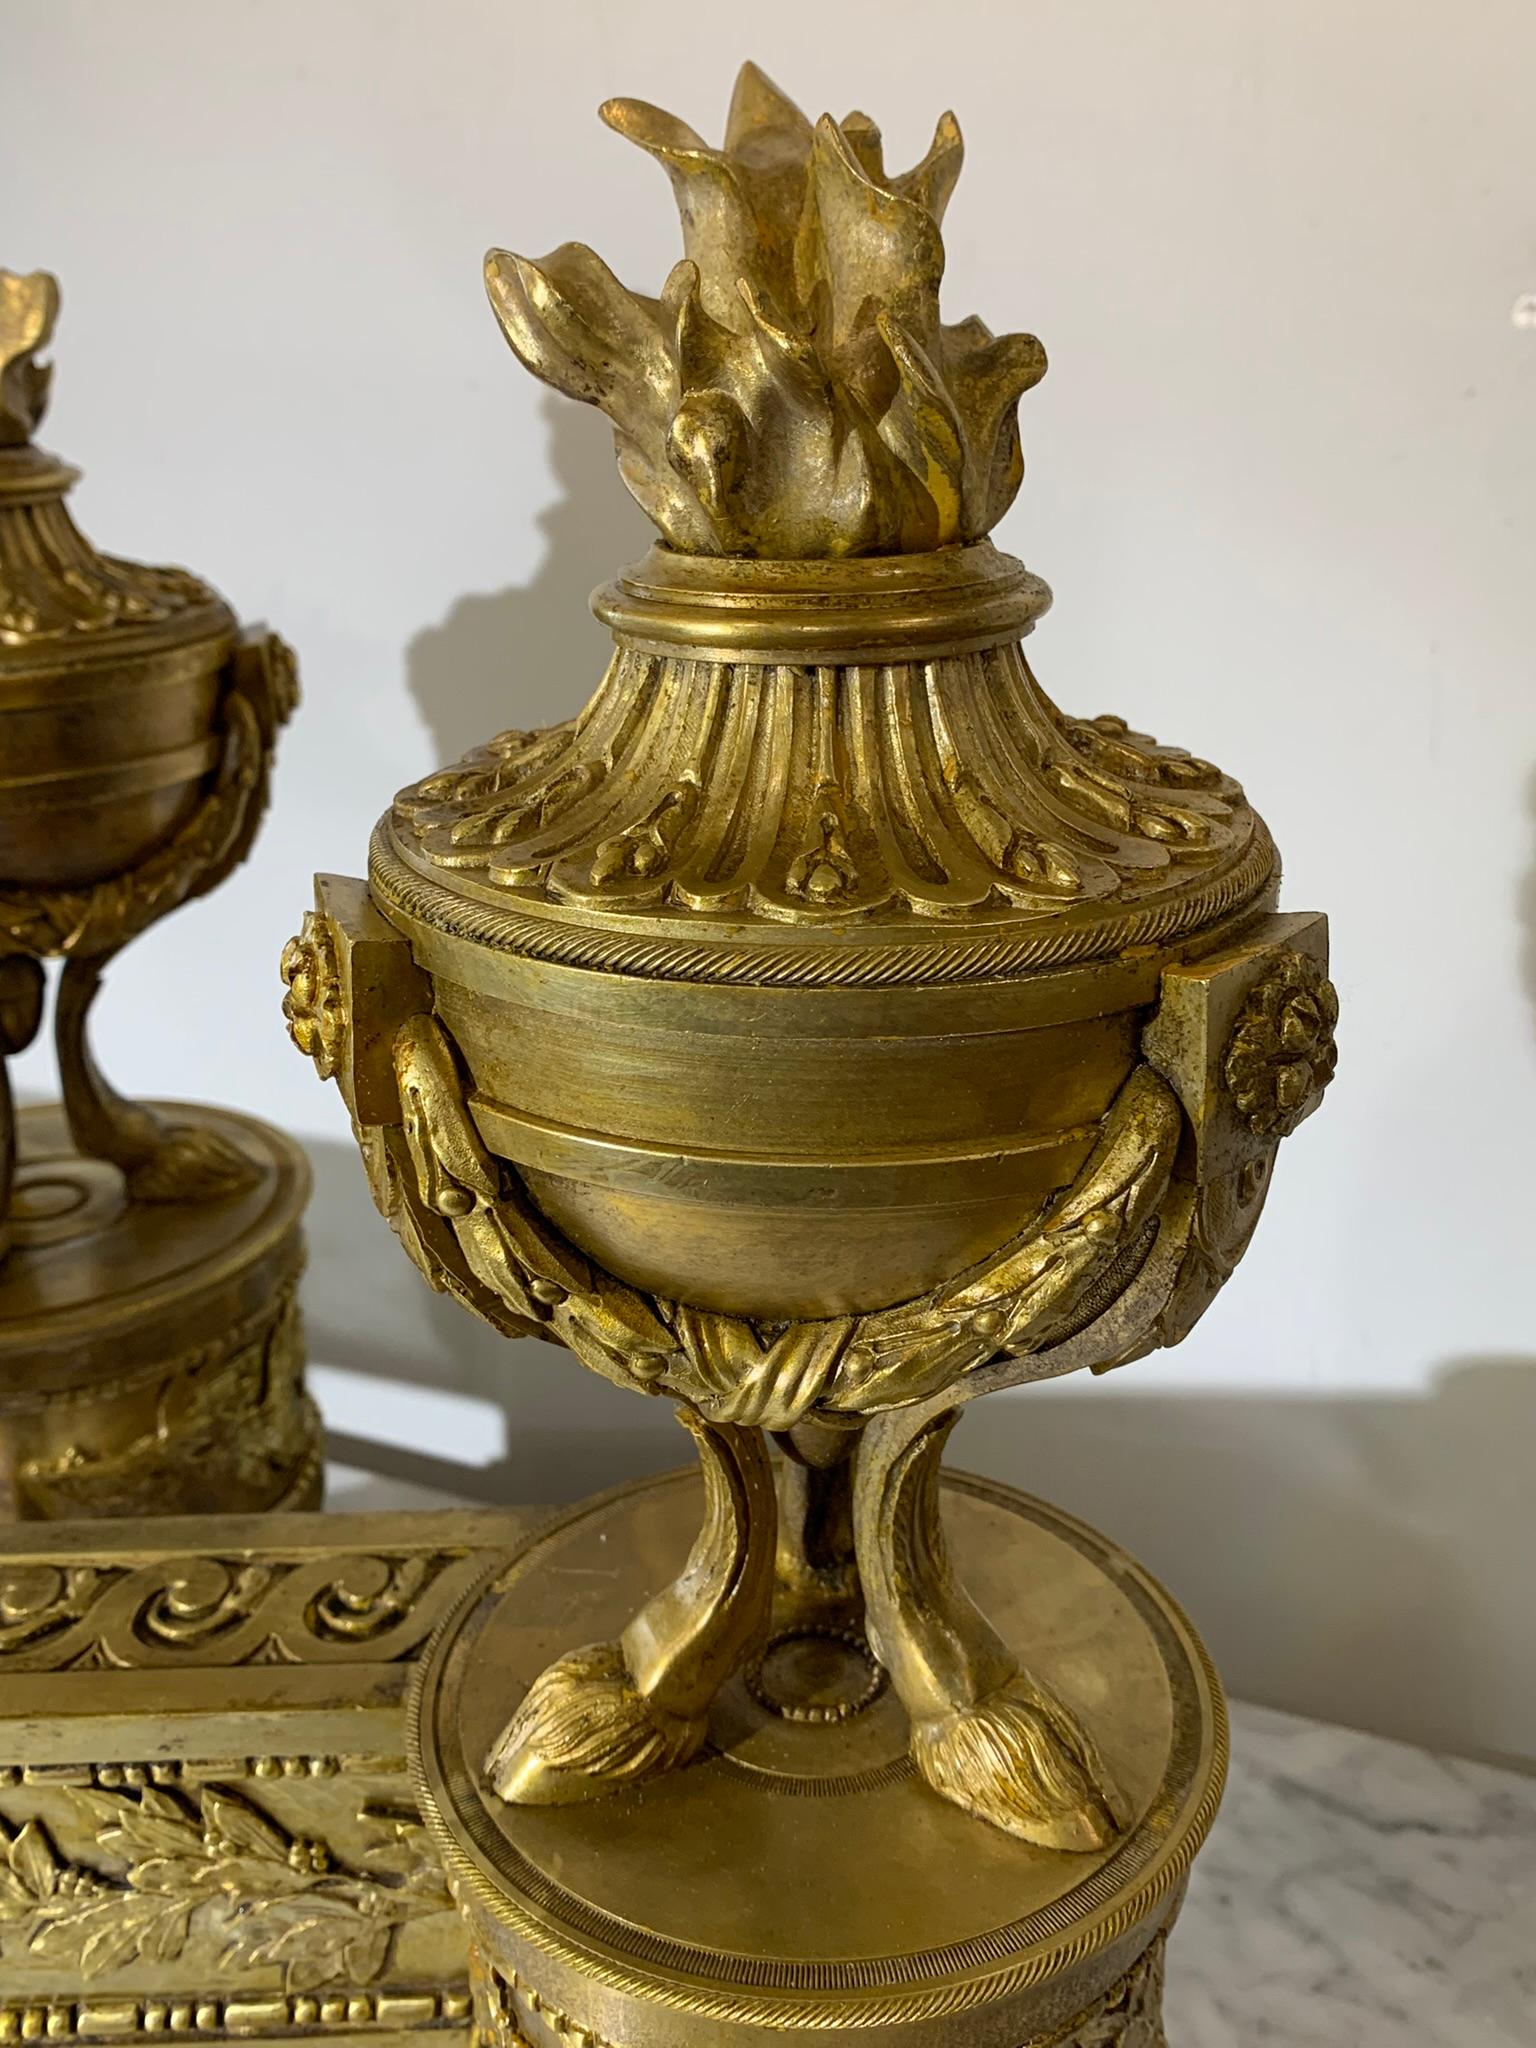 LATE 18th CENTURY PAIR OF NEOCLASSICAL GILDED BRONZE ANDIRONS For Sale 6